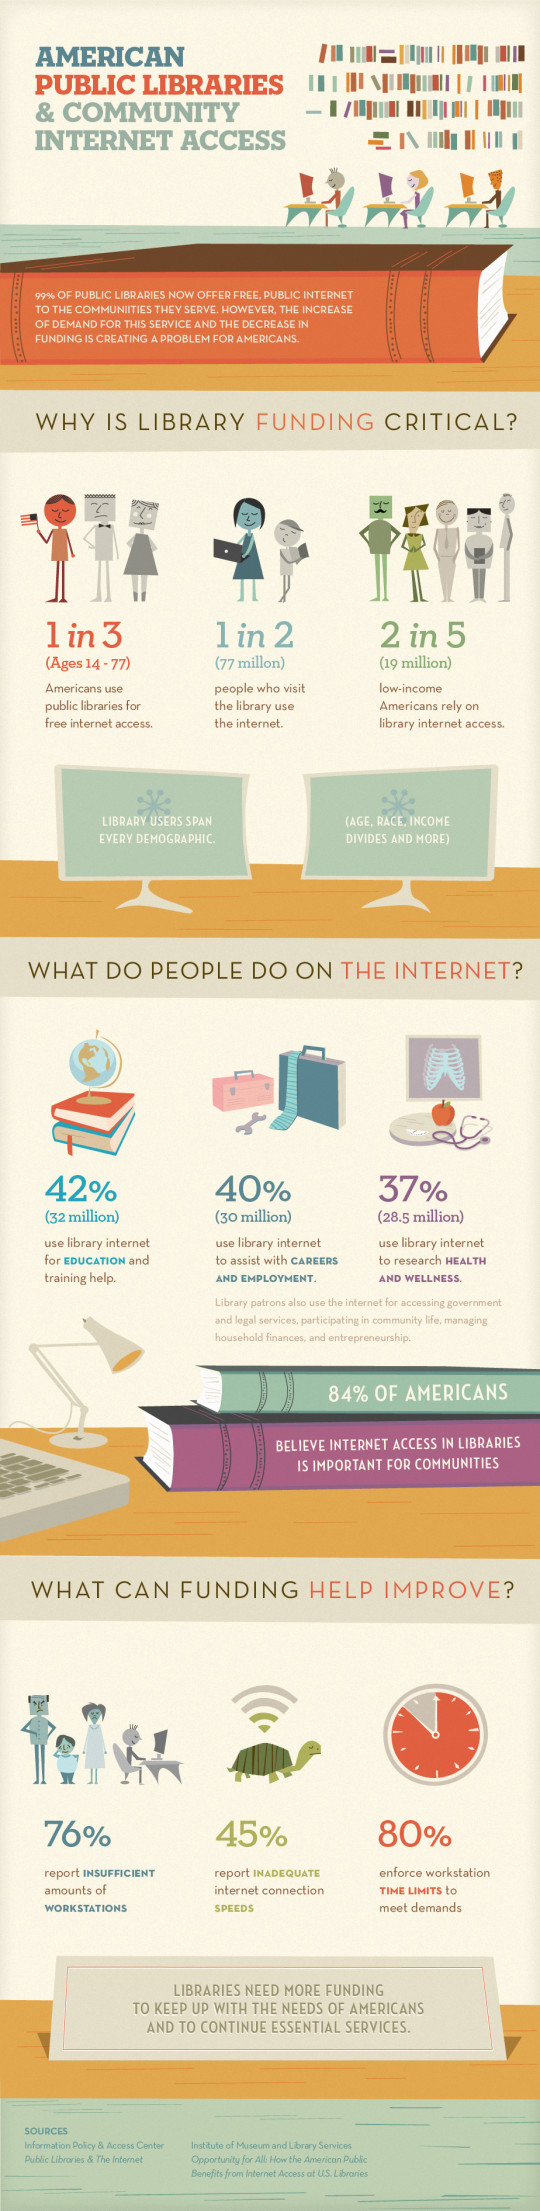 American public libraries - infographic